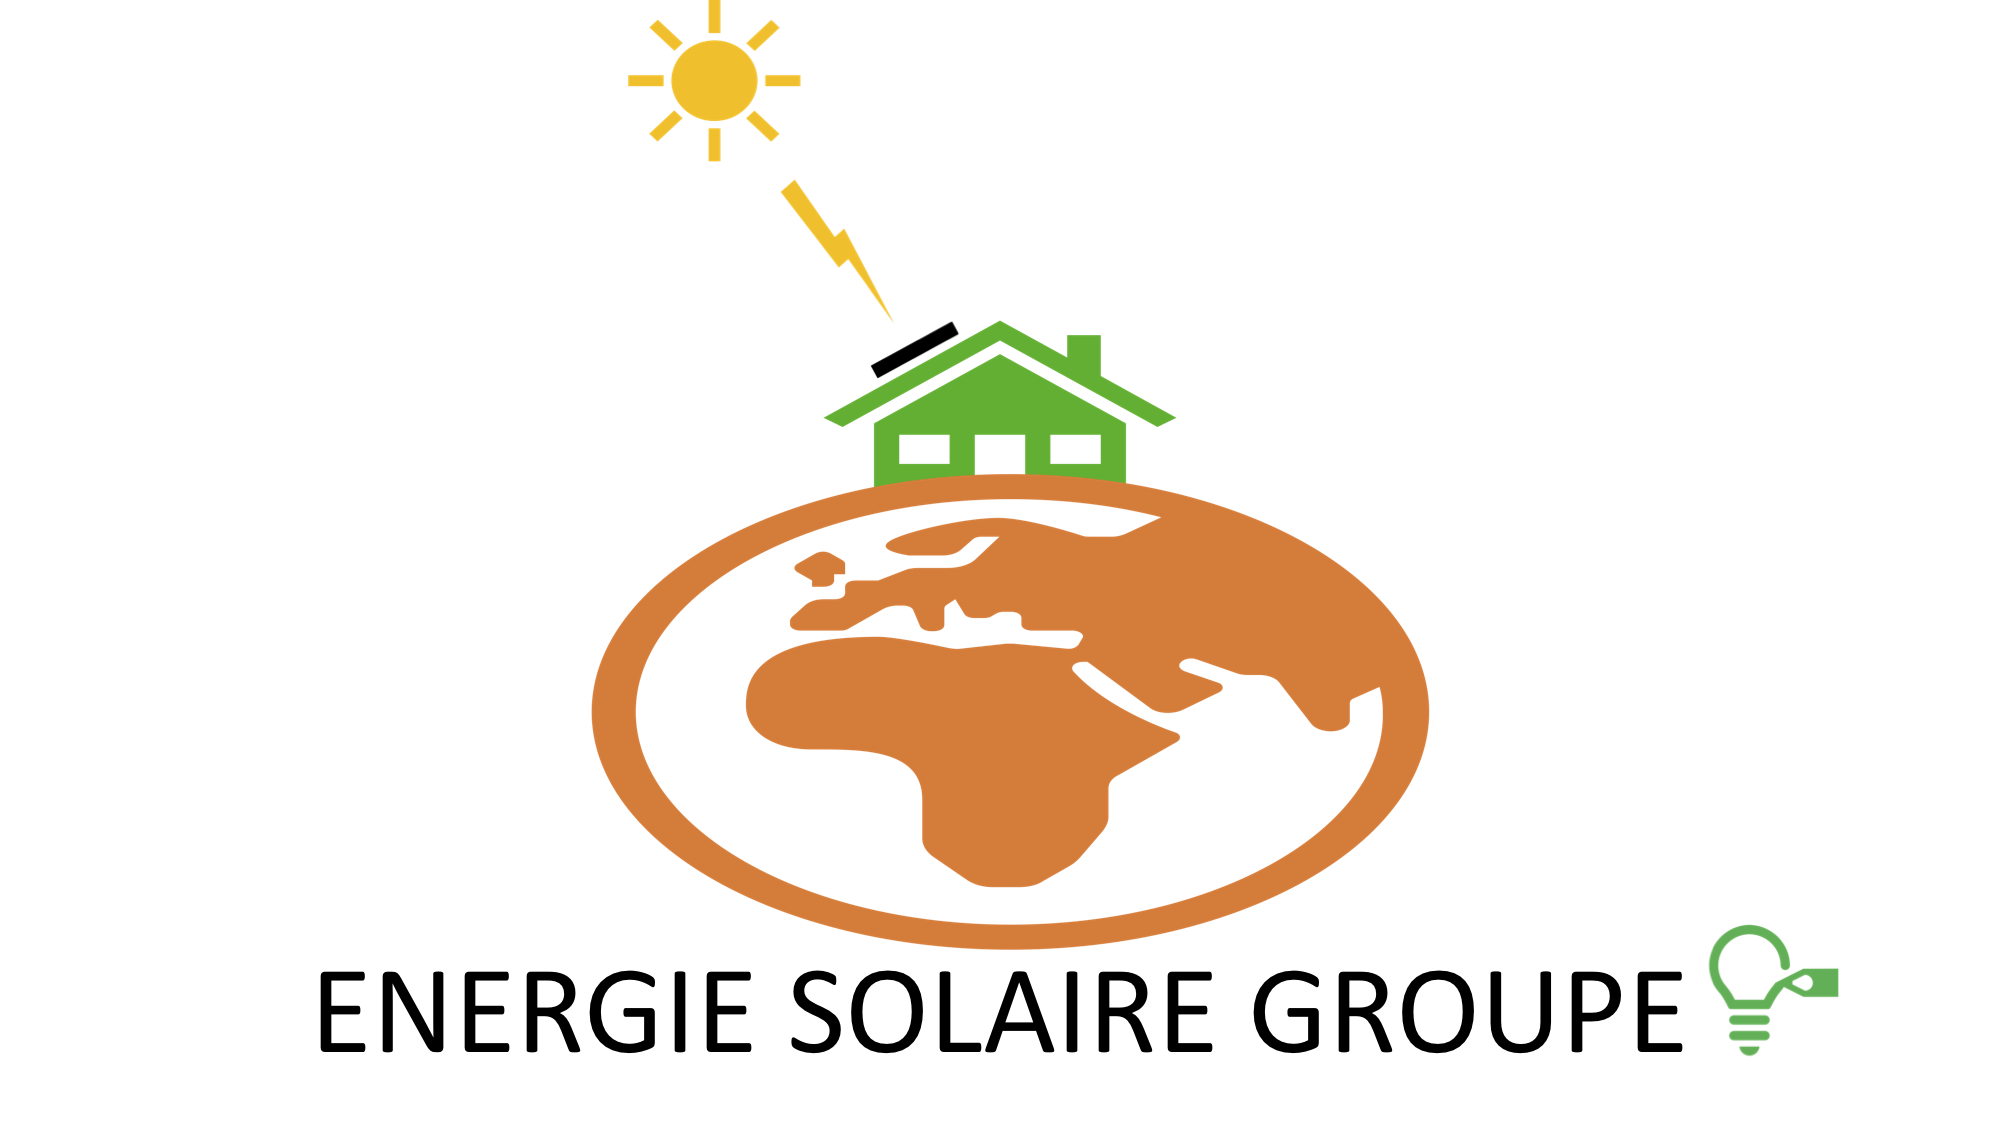 ENERGIE SOLAIRE GROUPE